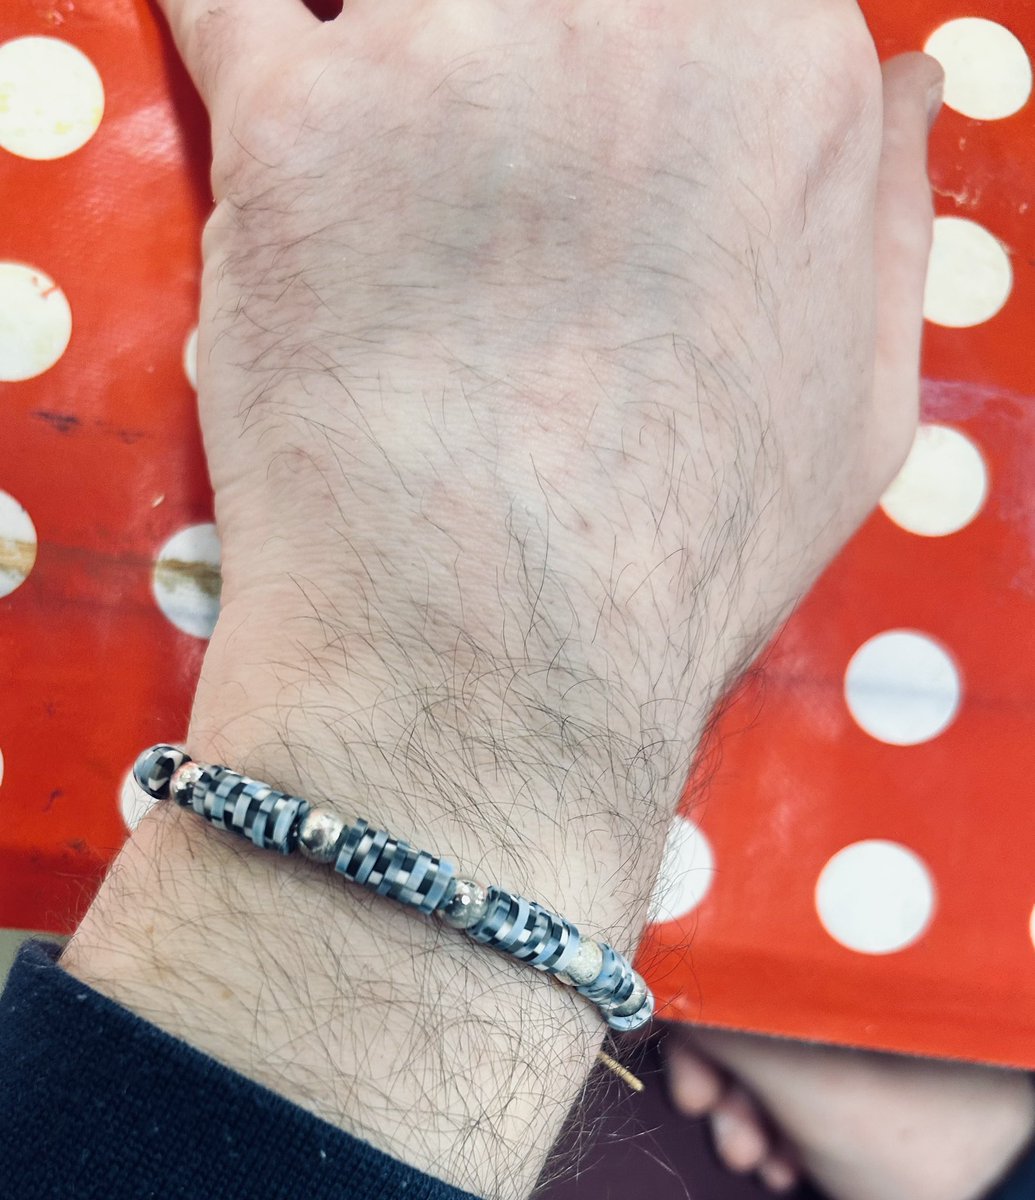 The men's bracelet session was interesting one ! I saw those service users (men's) from Brookward Participating with enthusiasm for the first time, sharing their experiences and stories. In end I realised understanding and care could be achieved by going one step further.